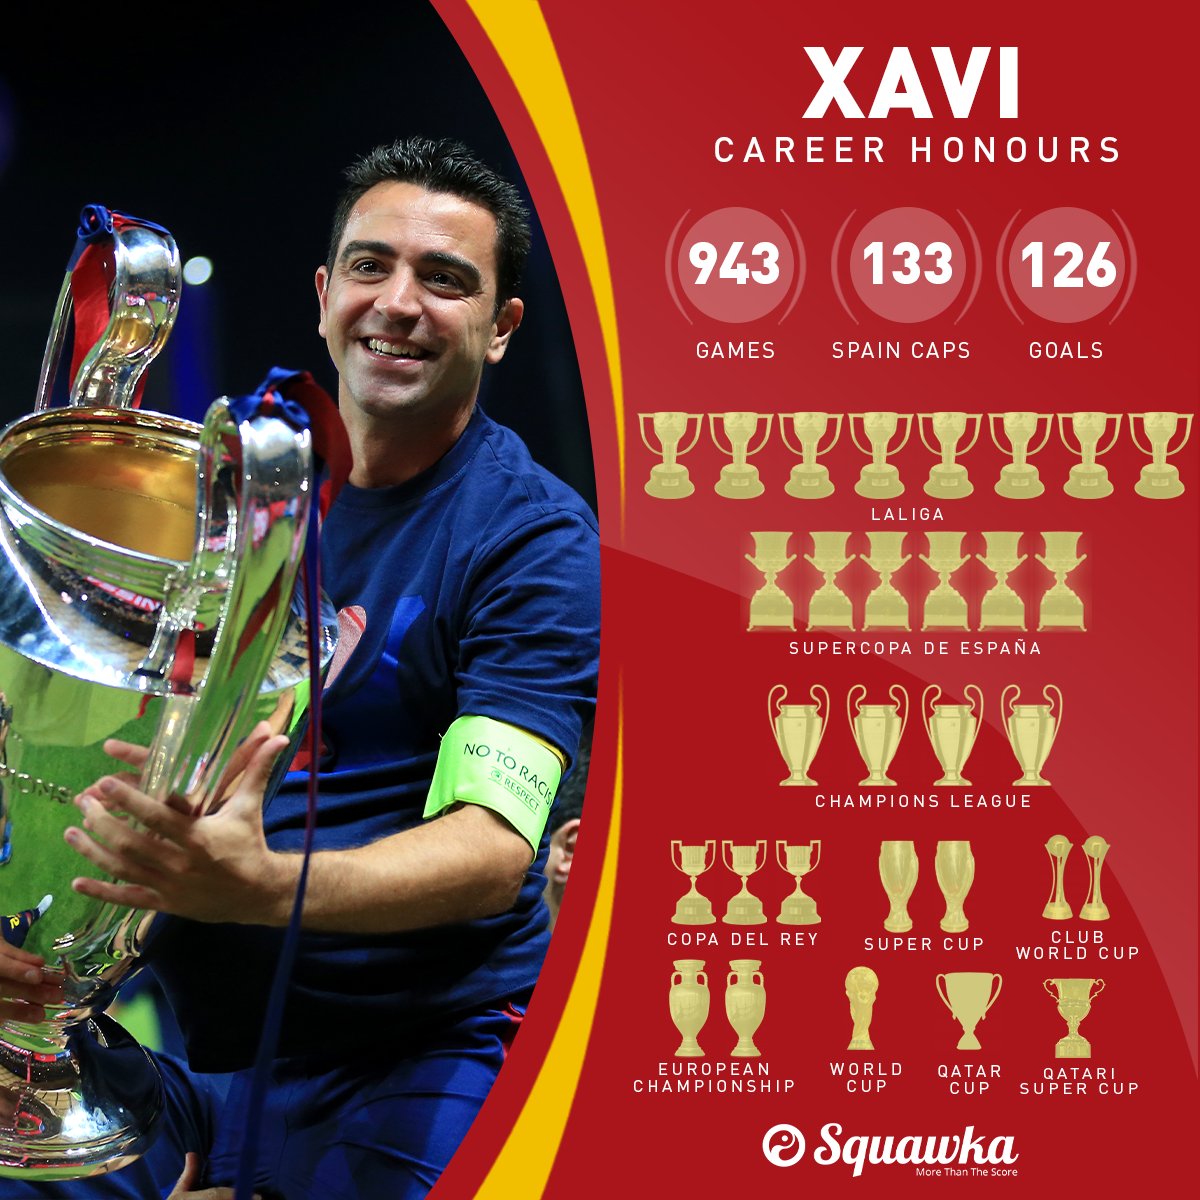 Squawka Football On This Day In 19 Xavi Announced He Would Retire From Professional Football At The End Of The Season An Eight Time Laliga Winner A Four Time Champions League Winner